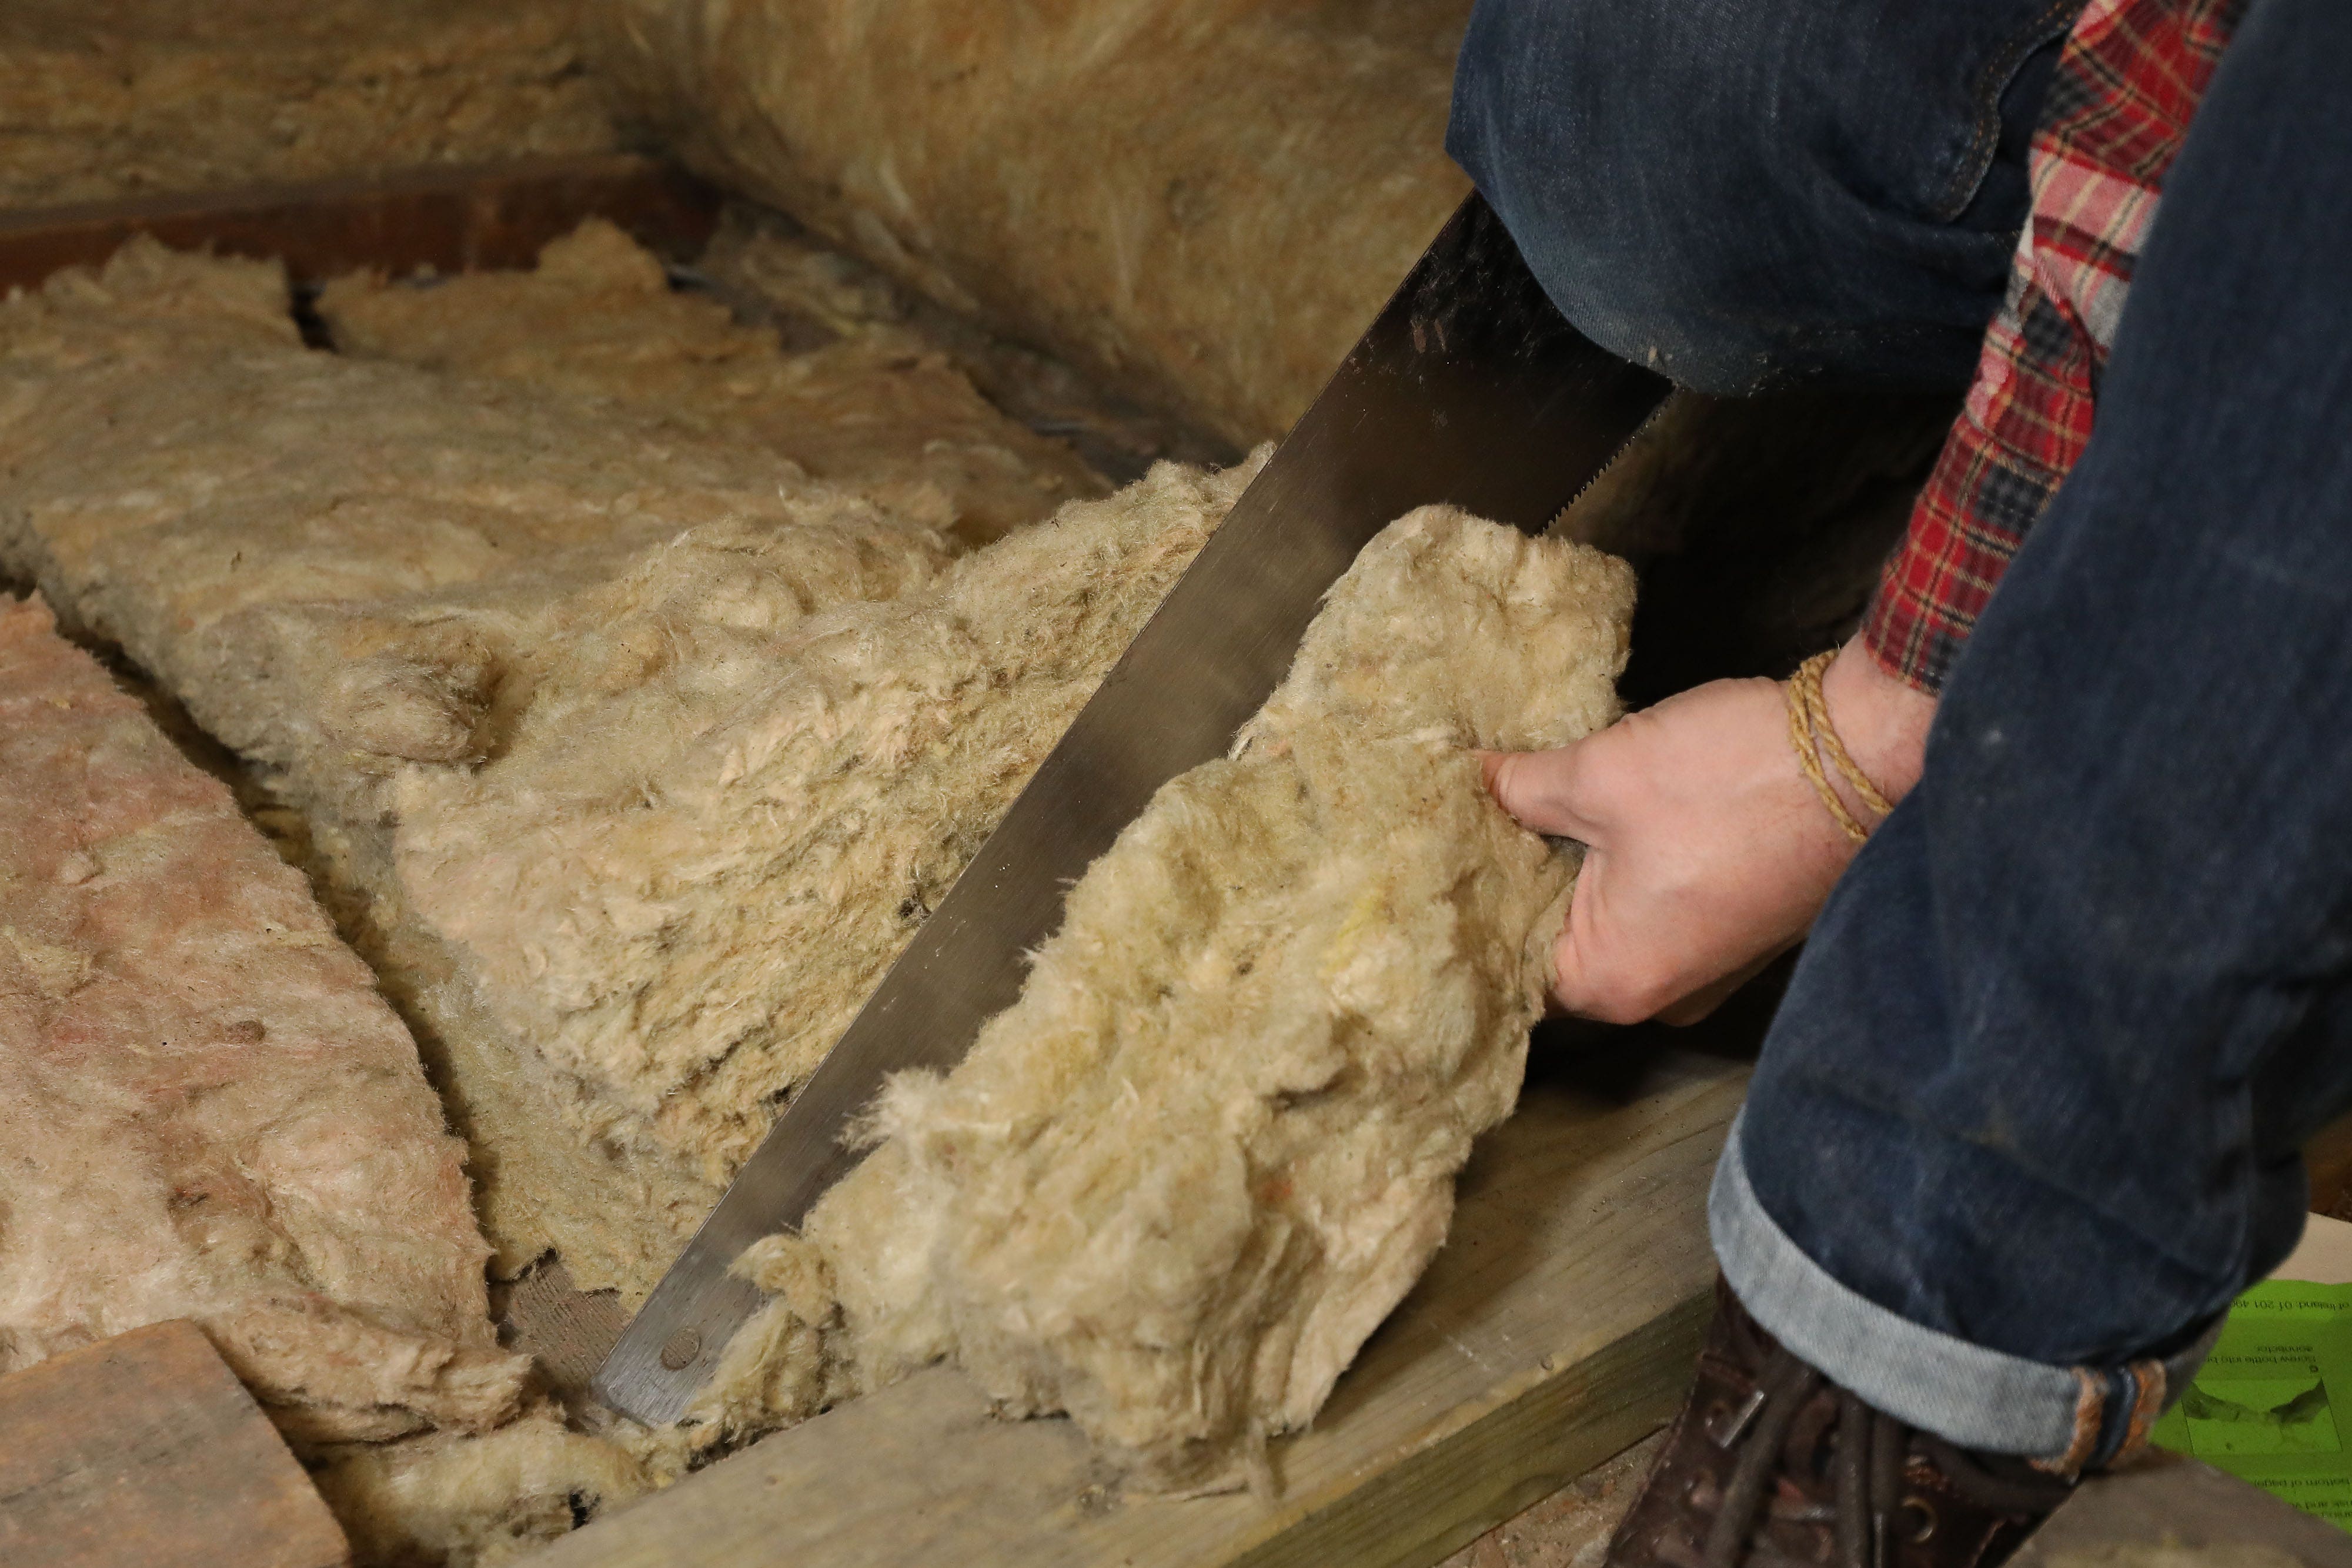 Installing insulation is one of the many ways to make a home more energy efficienct (Philip Toscano/PA)